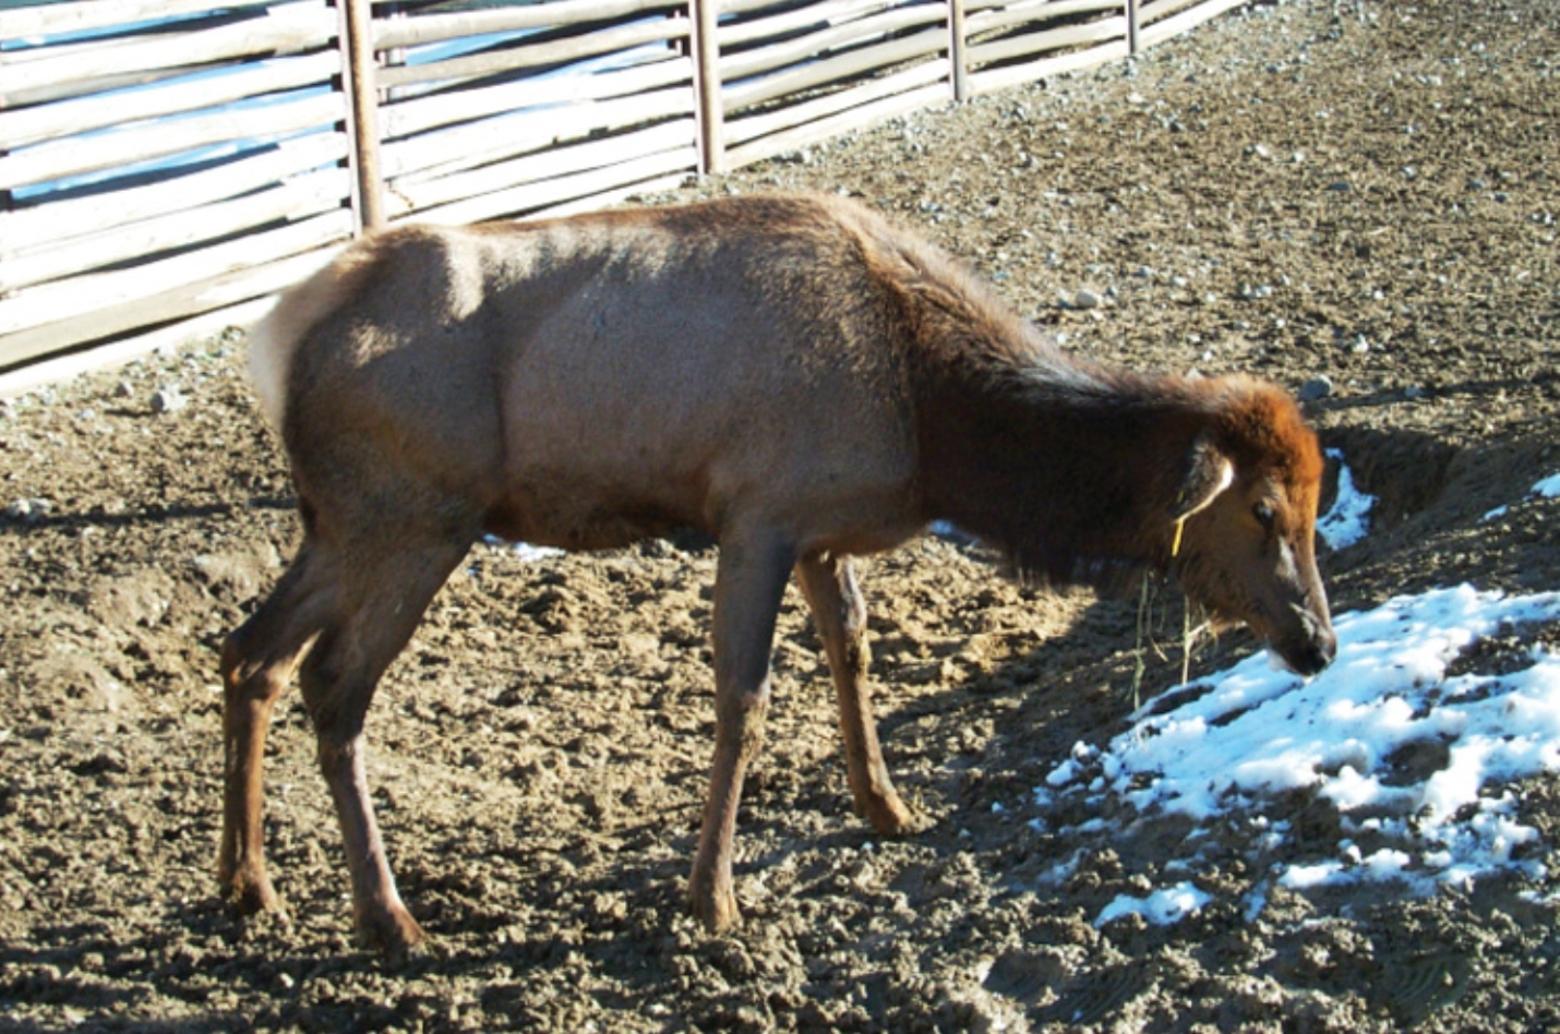 This is what a doomed Wyoming elk, sickened with Chronic Wasting Disease looks like. Symptoms include drooling, loss of physical coordination and mental disorientation, similar to human dementia patients in late stages of disease. The elk was part of a research project that confirmed there is no cure for CWD and that animals can catch the disease simply by coming in contact with a prion-contaminated environment. Photo courtesy Wyoming Game and Fish